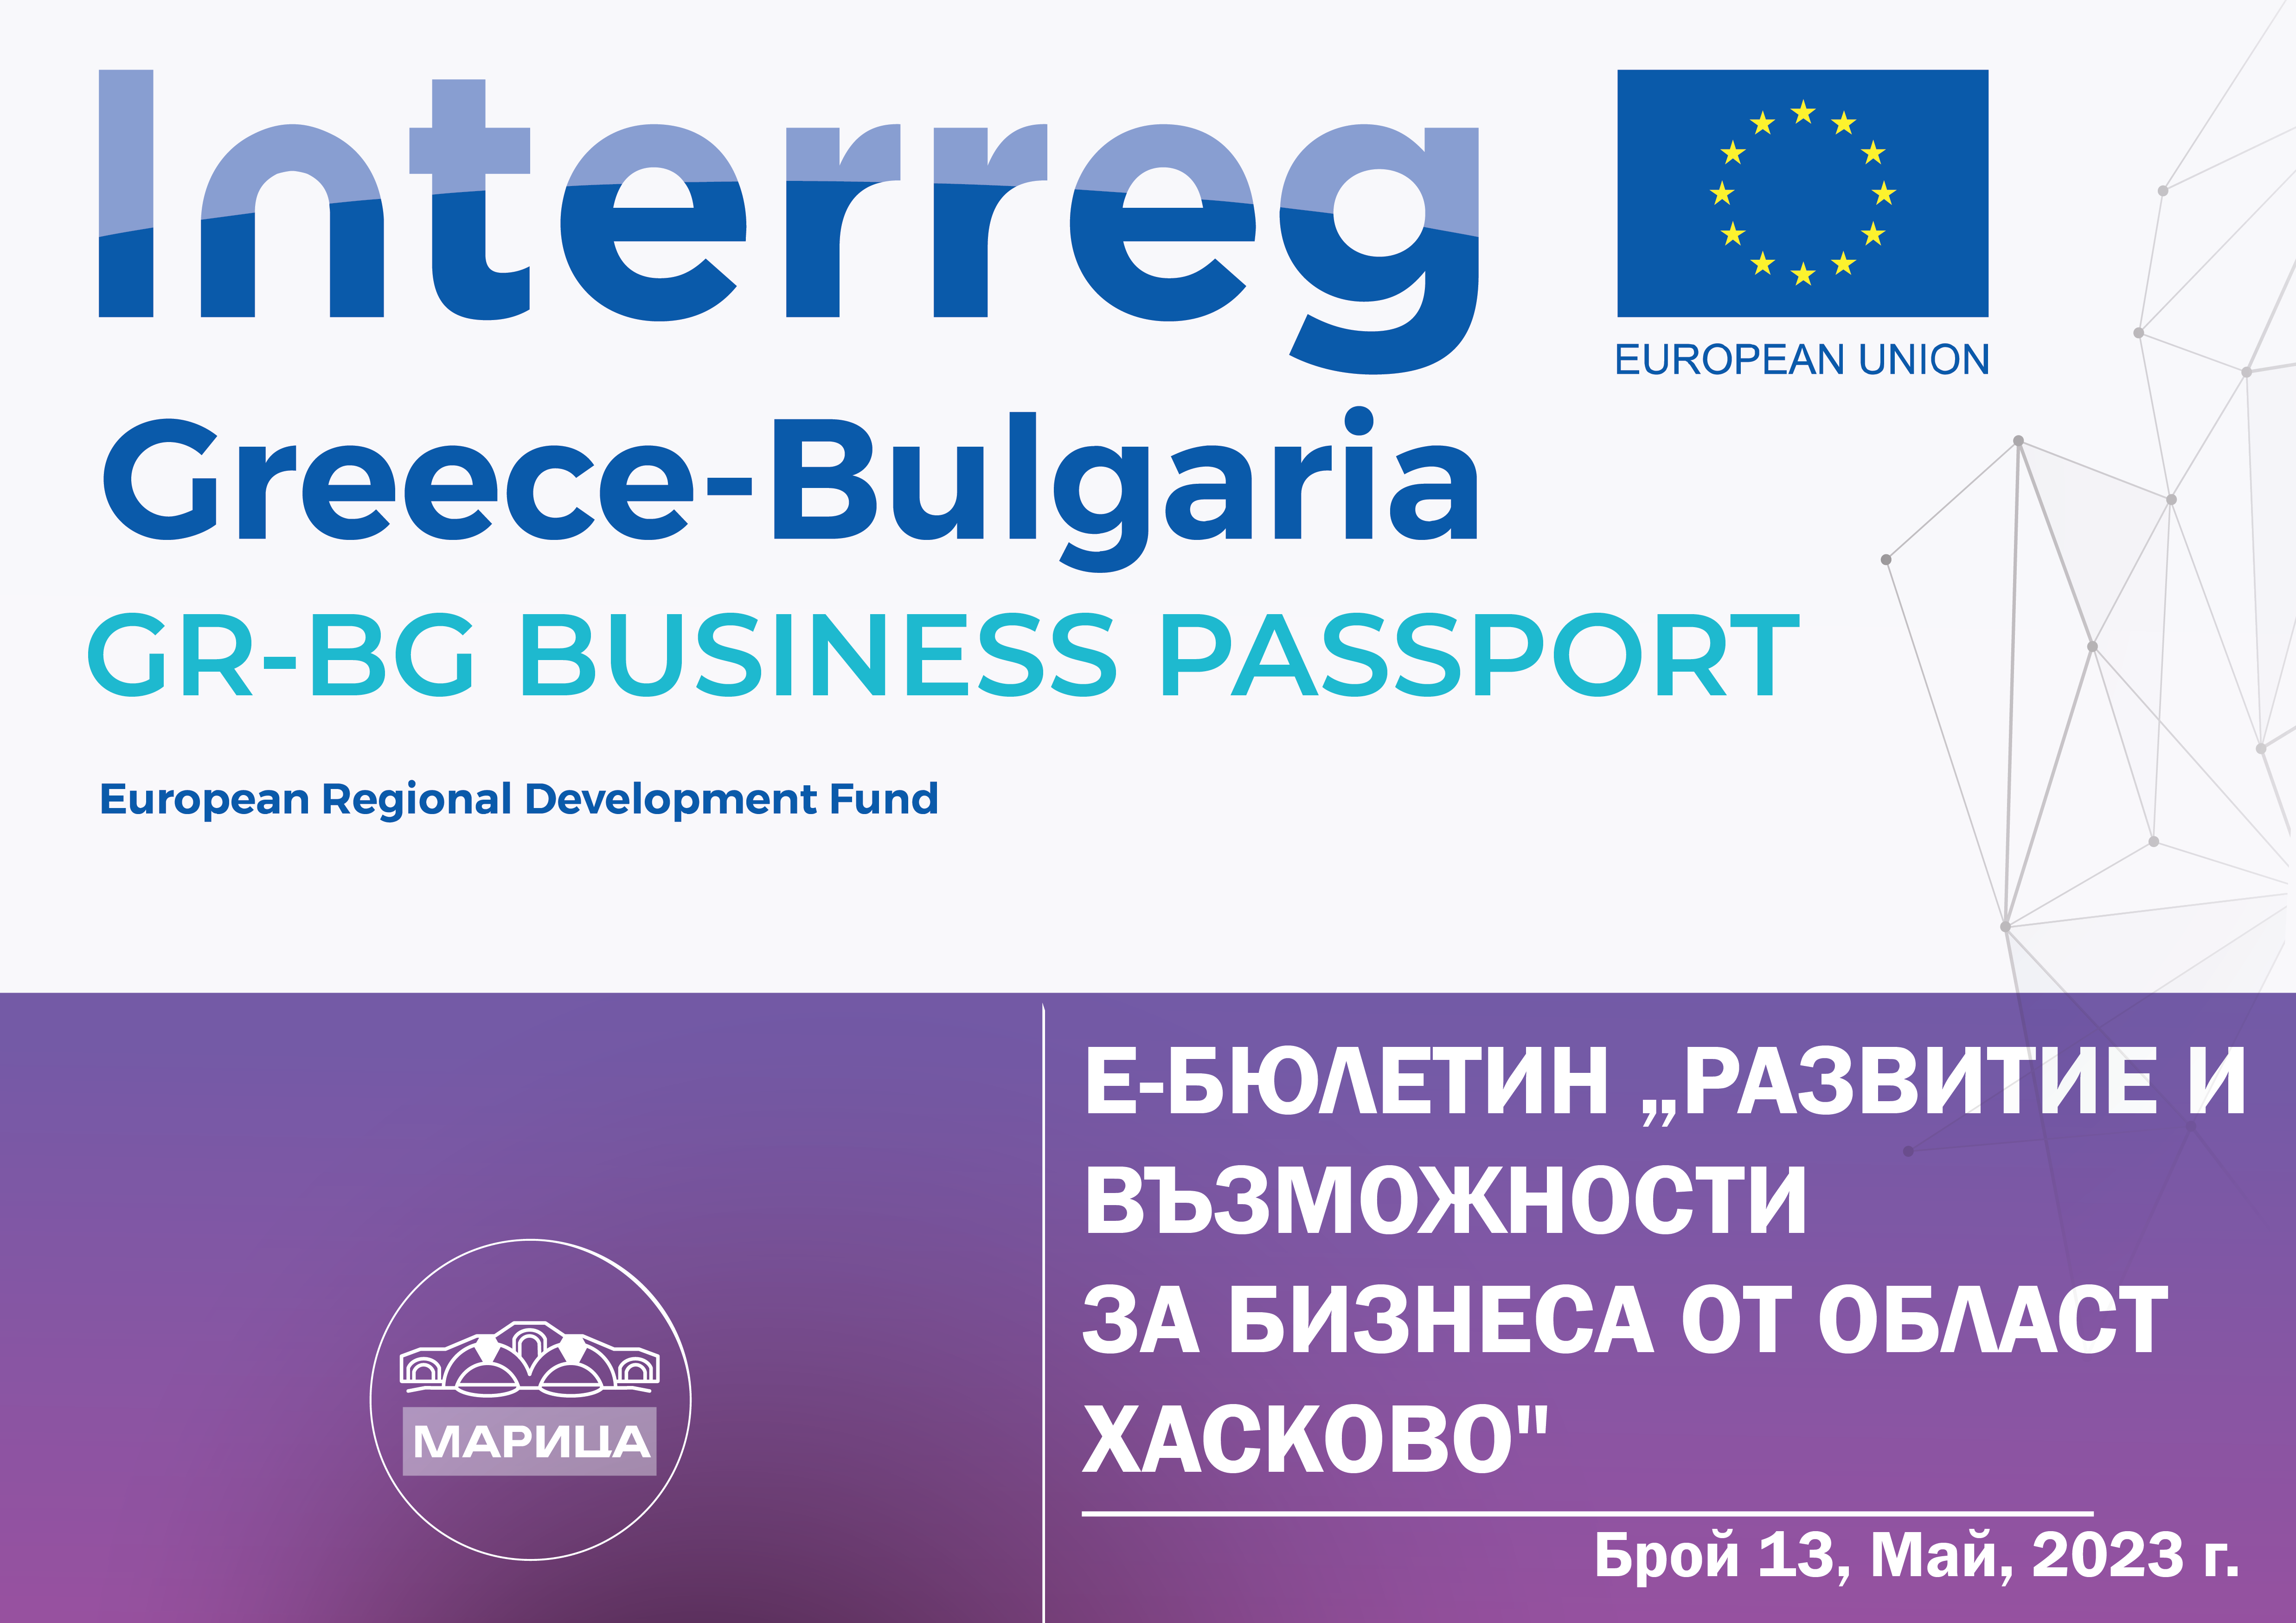 e-newsletter “Development and opportunities for business in the Haskovo region” under a project with the acronym “GR-BG BUSINESS PASSPORT, Маrch, 2023, 13th edition